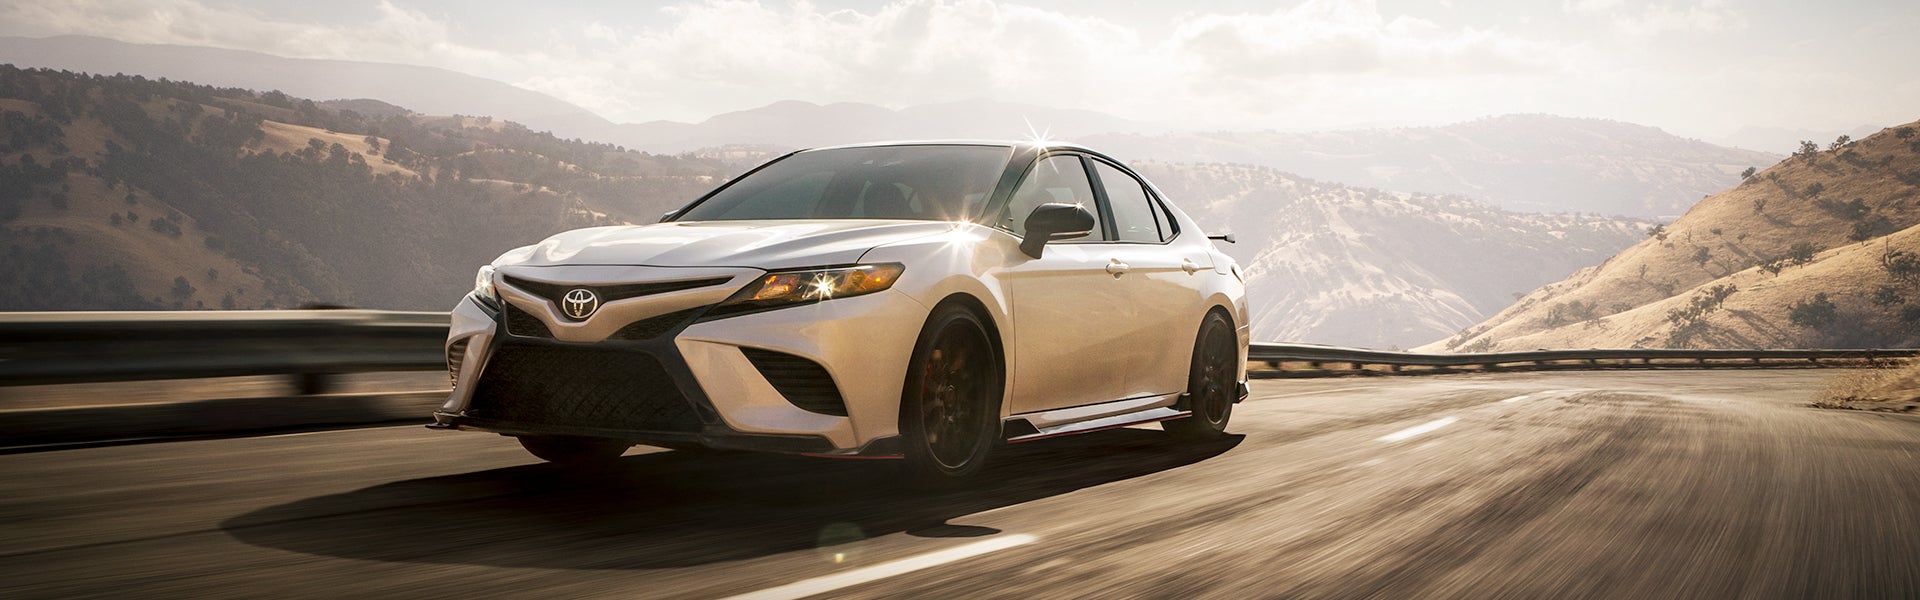 The 2021 Toyota Camry vs. The 2021 Honda Accord at Bennett Toyota | White 2021 Toyota Camry TRD Pro Driving Around on Road Overlooking Mountains